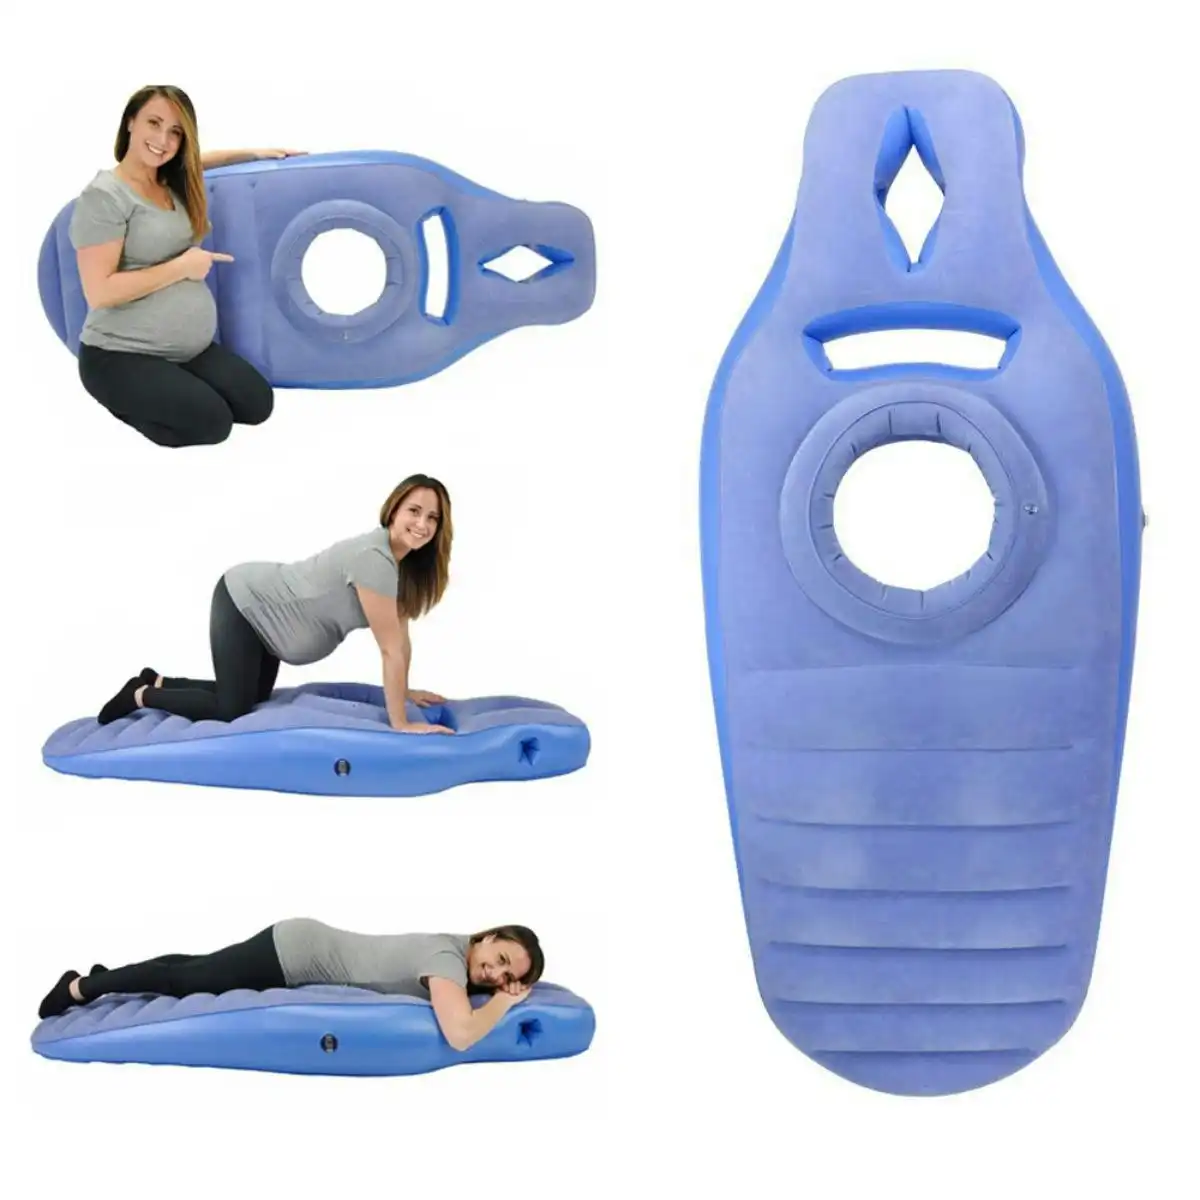 Toddly DreamBelly Inflatable Pregnancy Pillow Comfort for Expecting Mothers